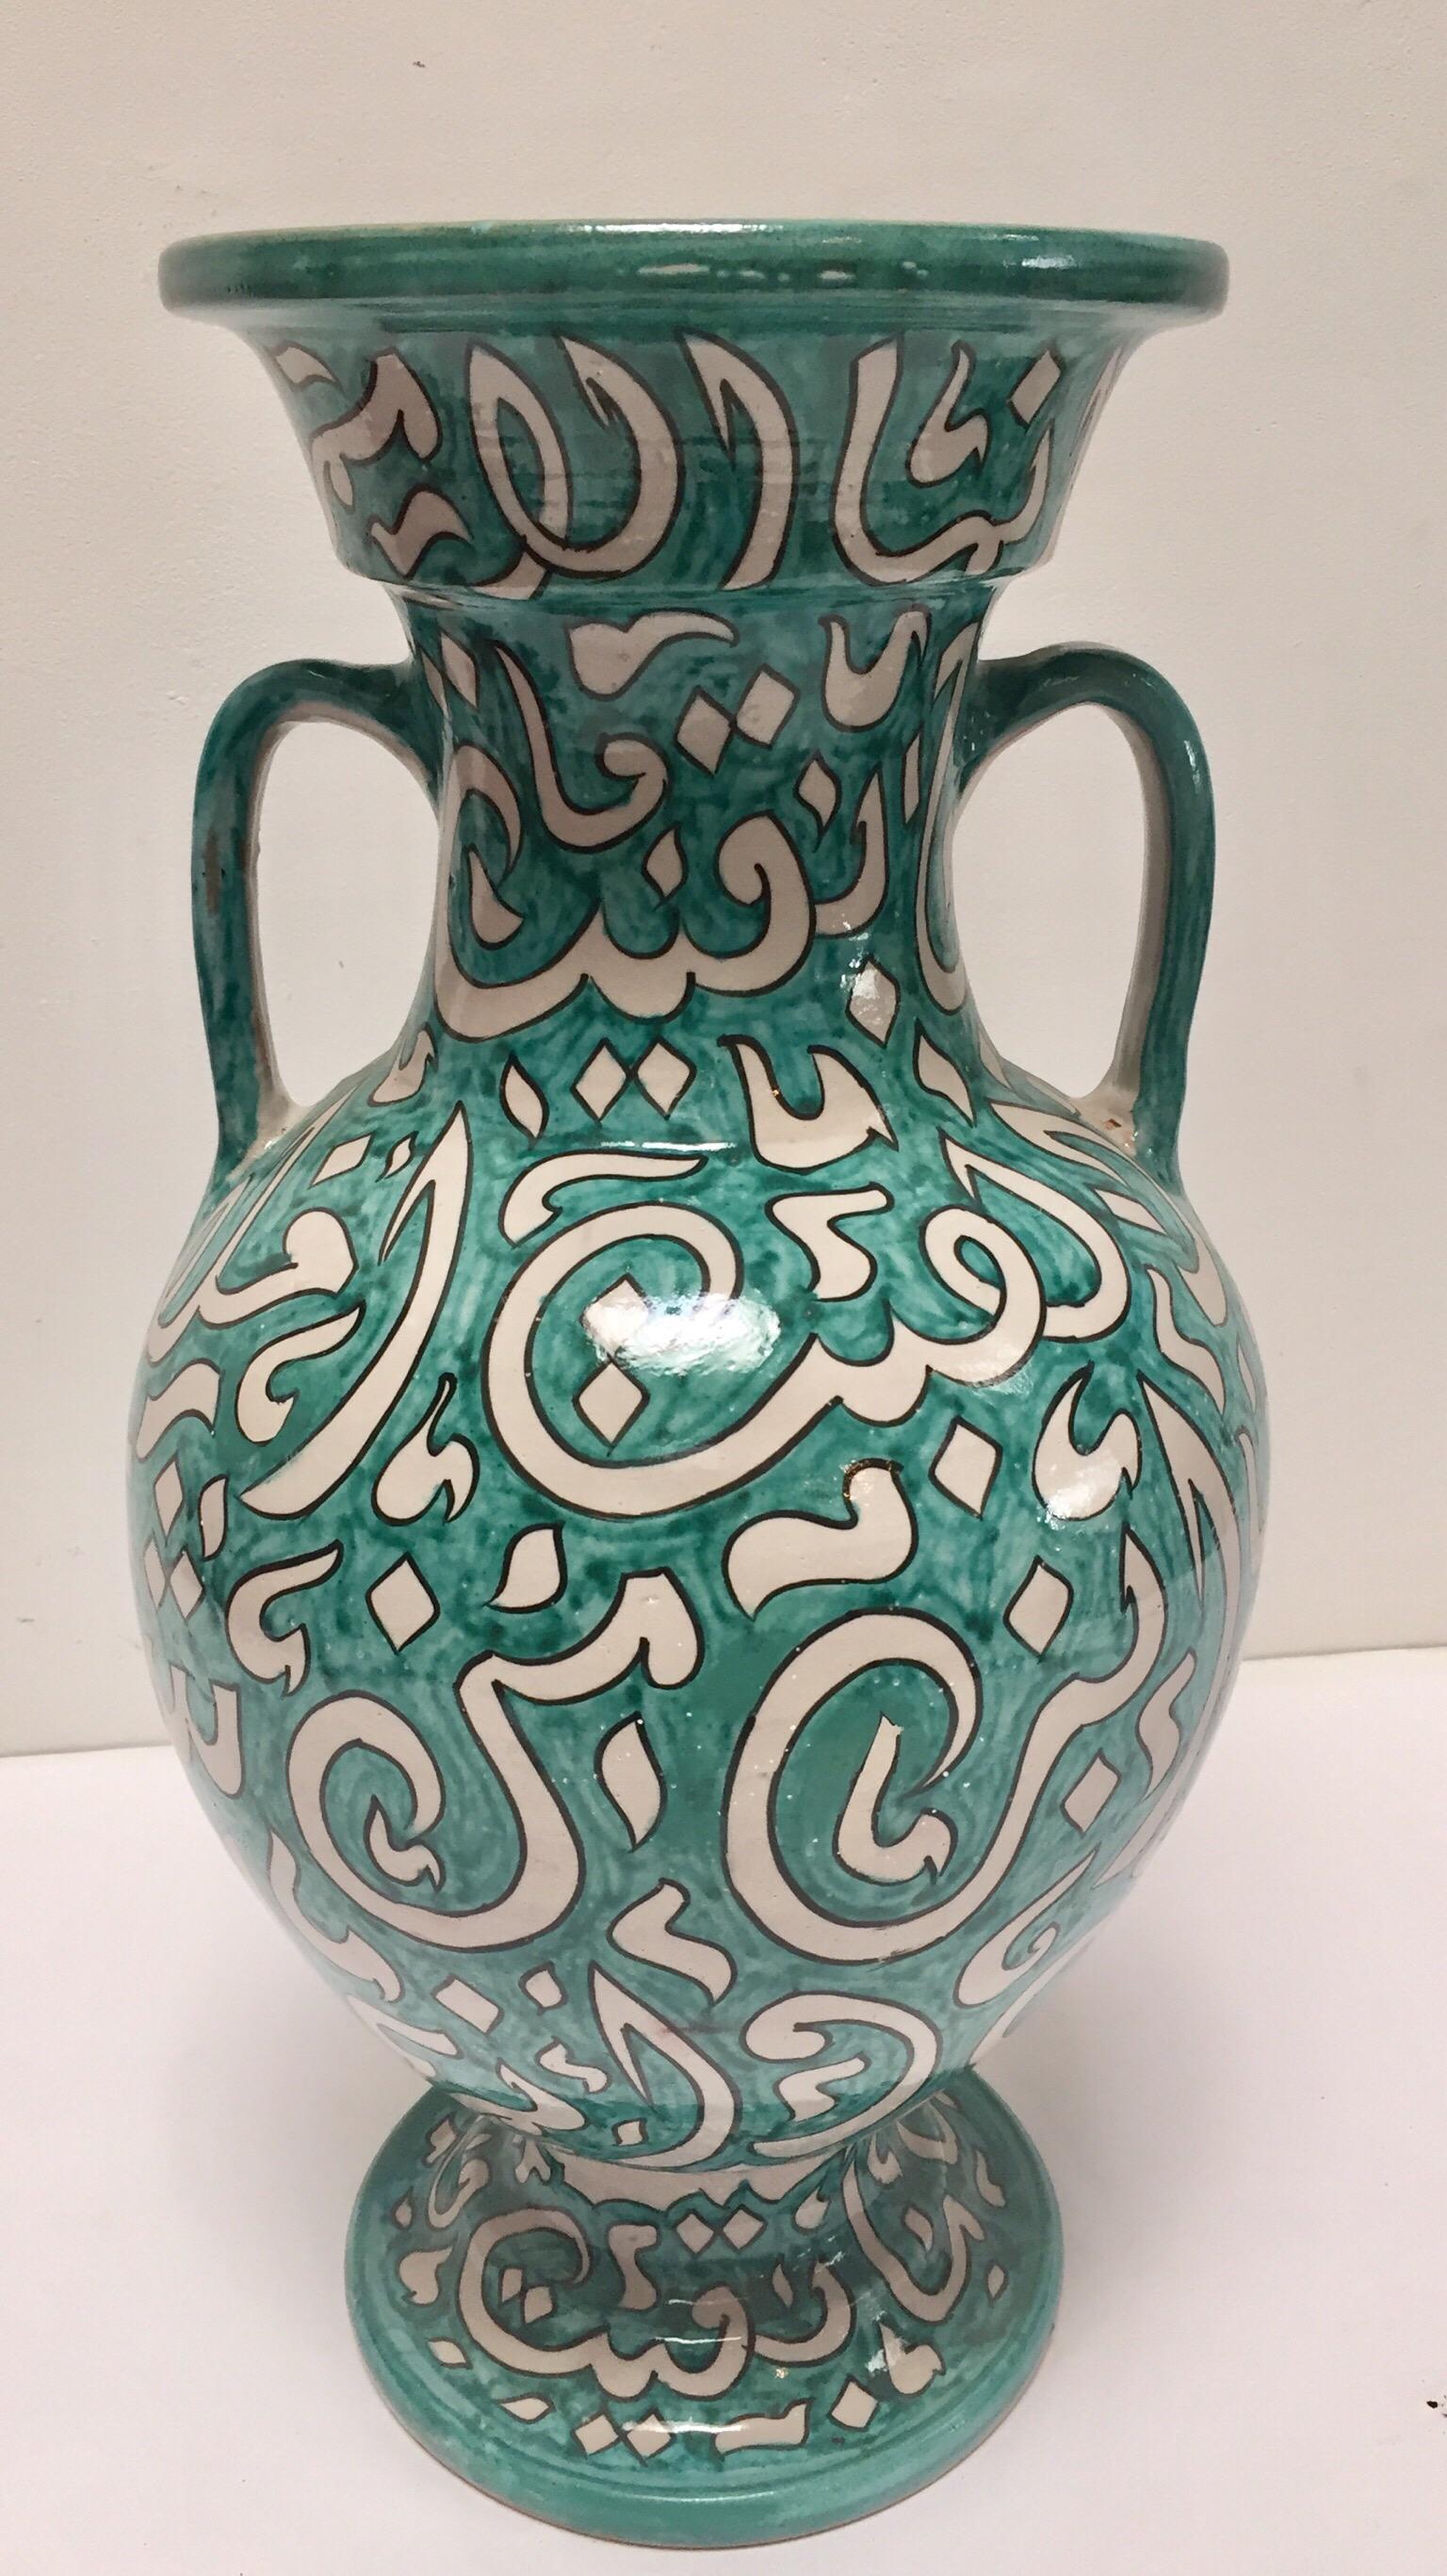 Large Moroccan glazed ceramic vase from Fez.
Moorish style ceramic handcrafted and hand painted with Arabic calligraphy writing.
This kind of Art Writing looks calligraphic is called Lettrism, it is a form of art that uses letters that are not